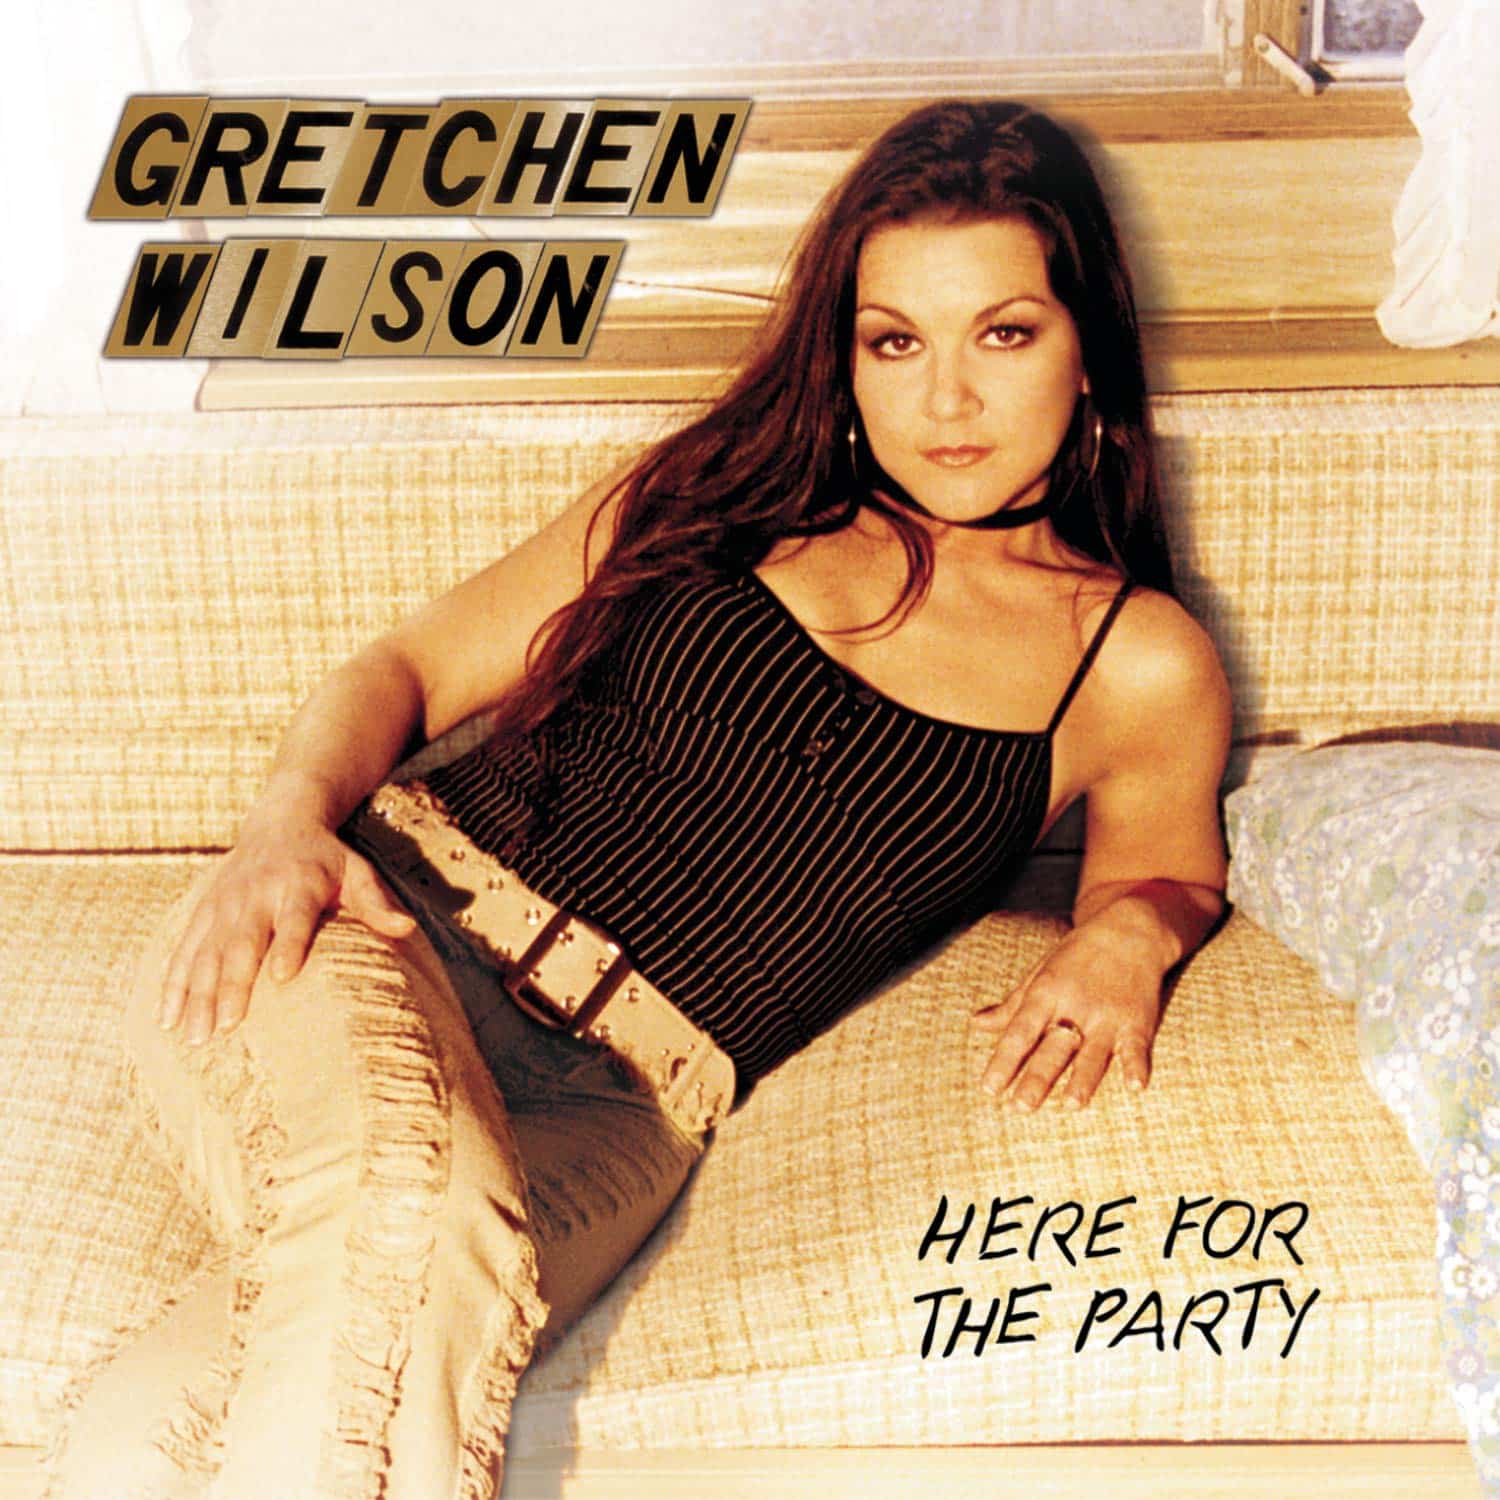 Gretchen Wilson included her debut single "Redneck Woman" on her album "Here For The Party"